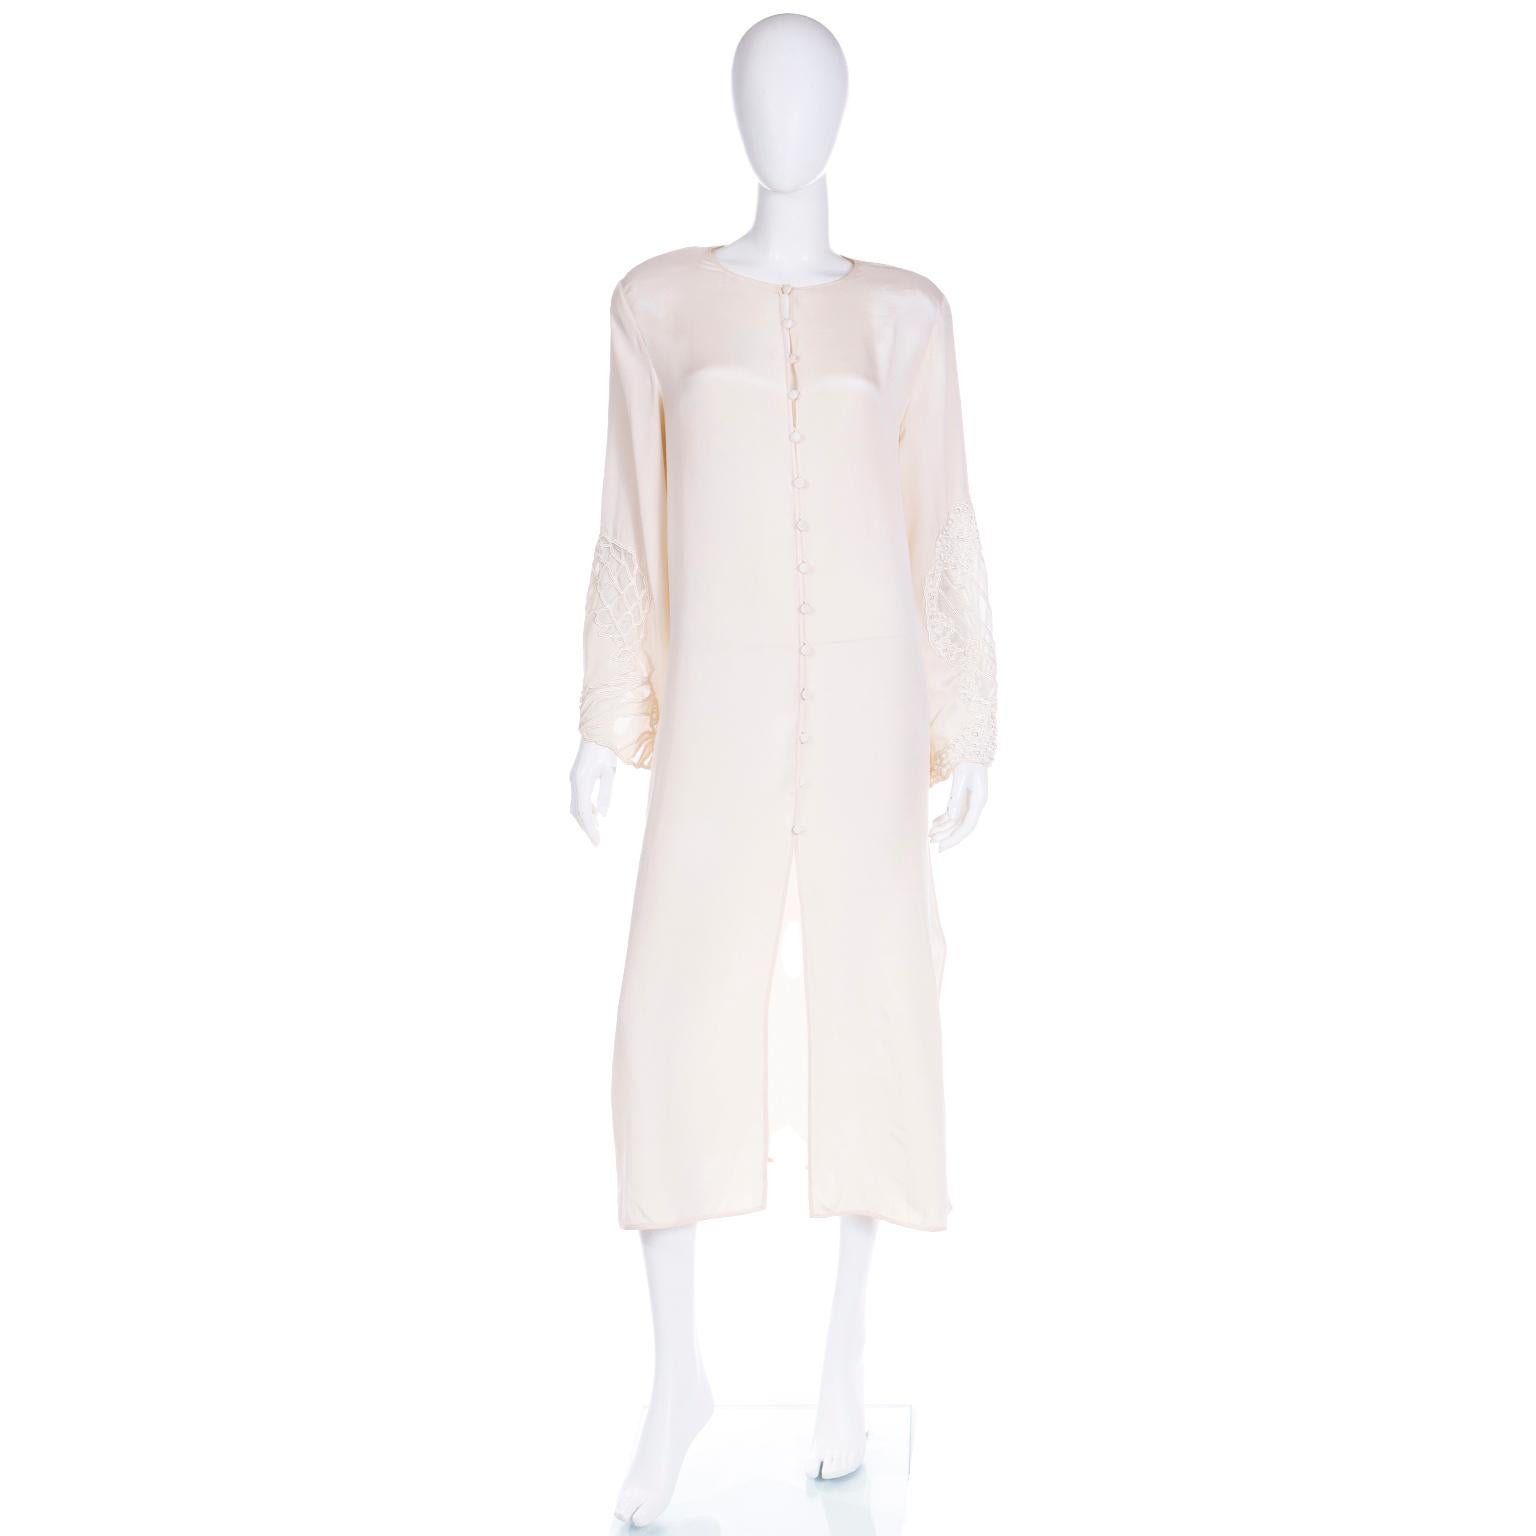 We acquired this pretty vintage Laura Biagiotti ivory satin caftan style dress along with a Laura Biagiotti ivory coat with a mesh overlay that the original owner wore together. The coat is available on 1stdibs as well. The standouts of this dress